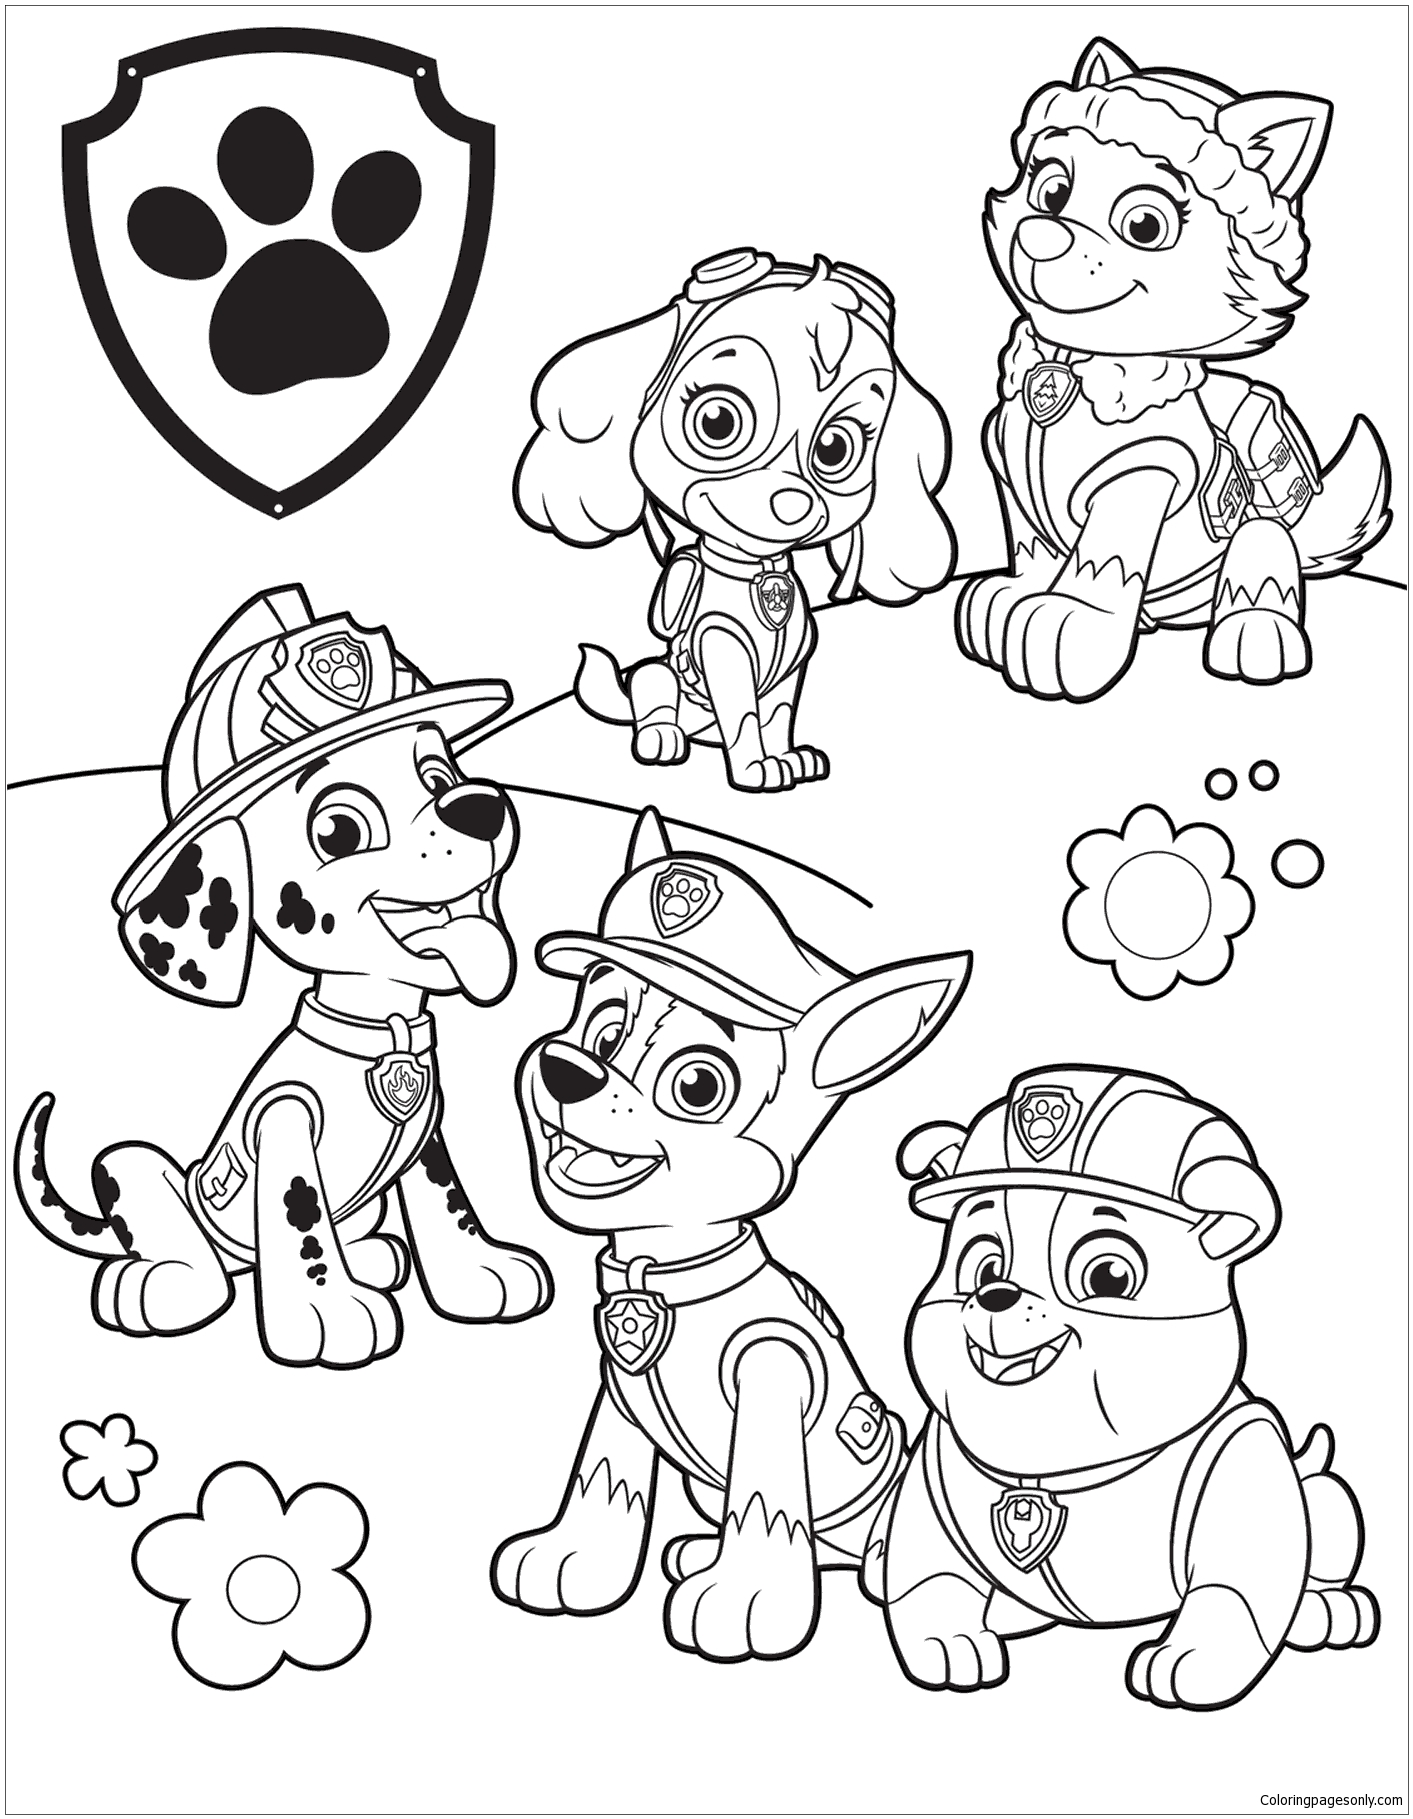 Coloring Pages Only An Online Coloring Website For People Of Al ...